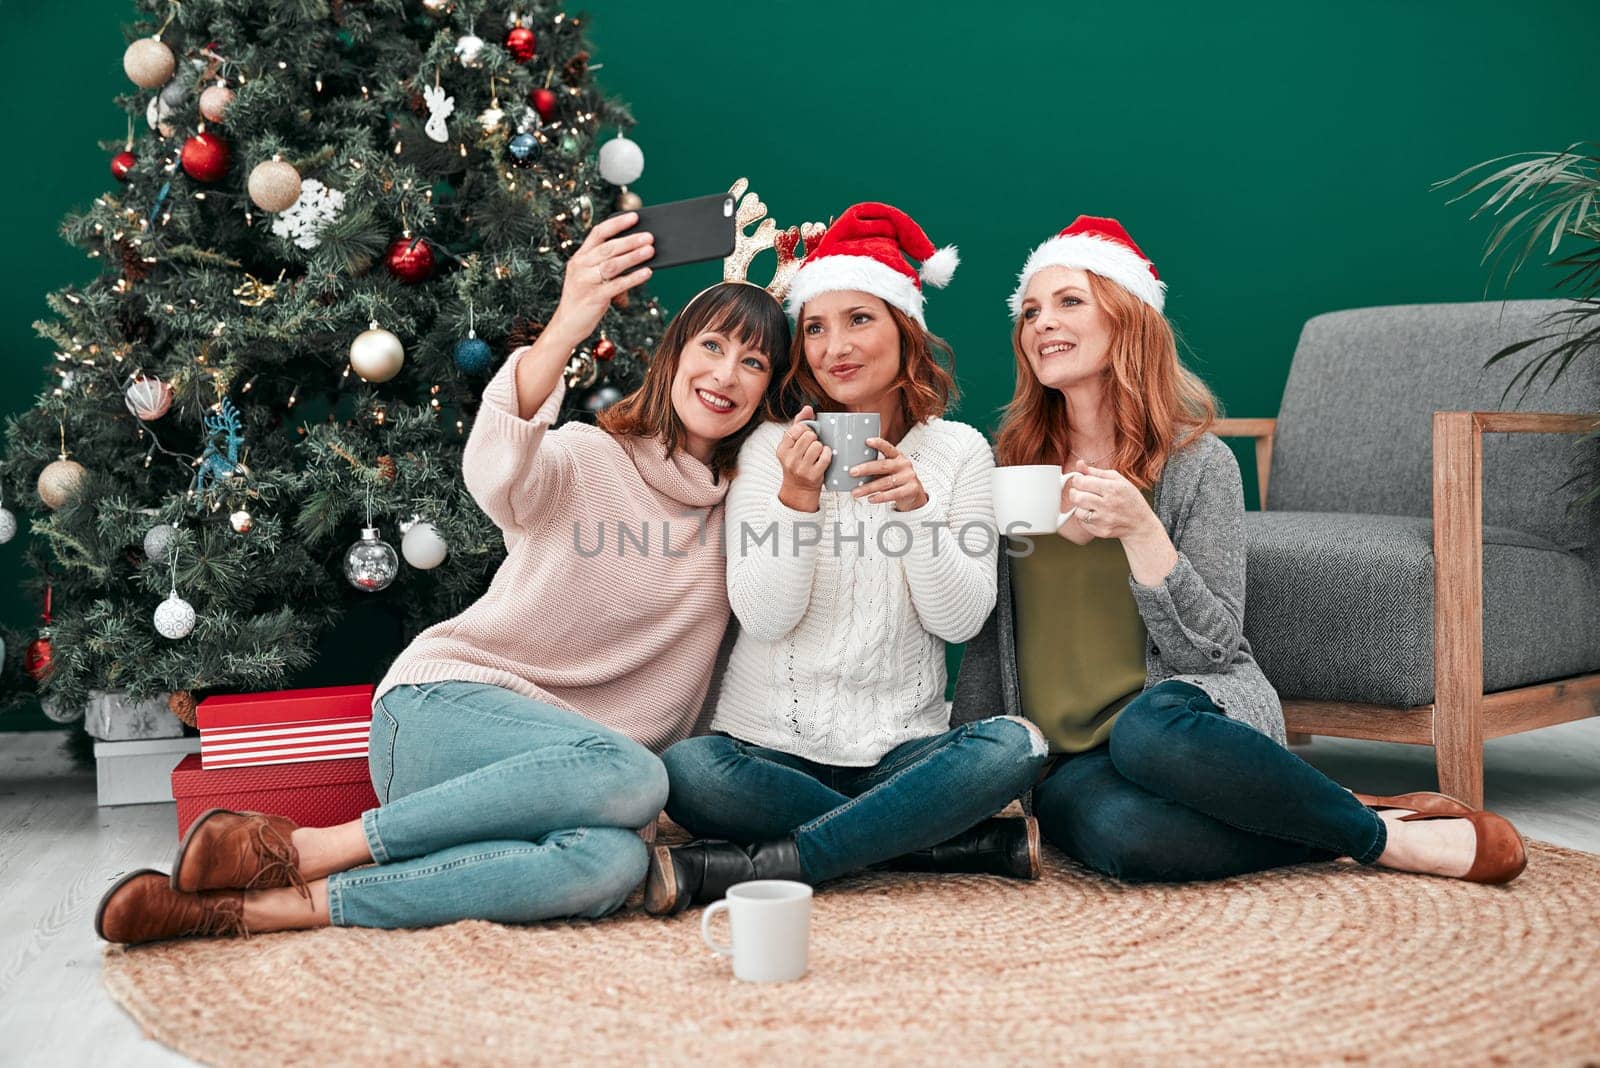 I cant wait to get this framed. three attractive women taking Christmas selfies together at home. by YuriArcurs